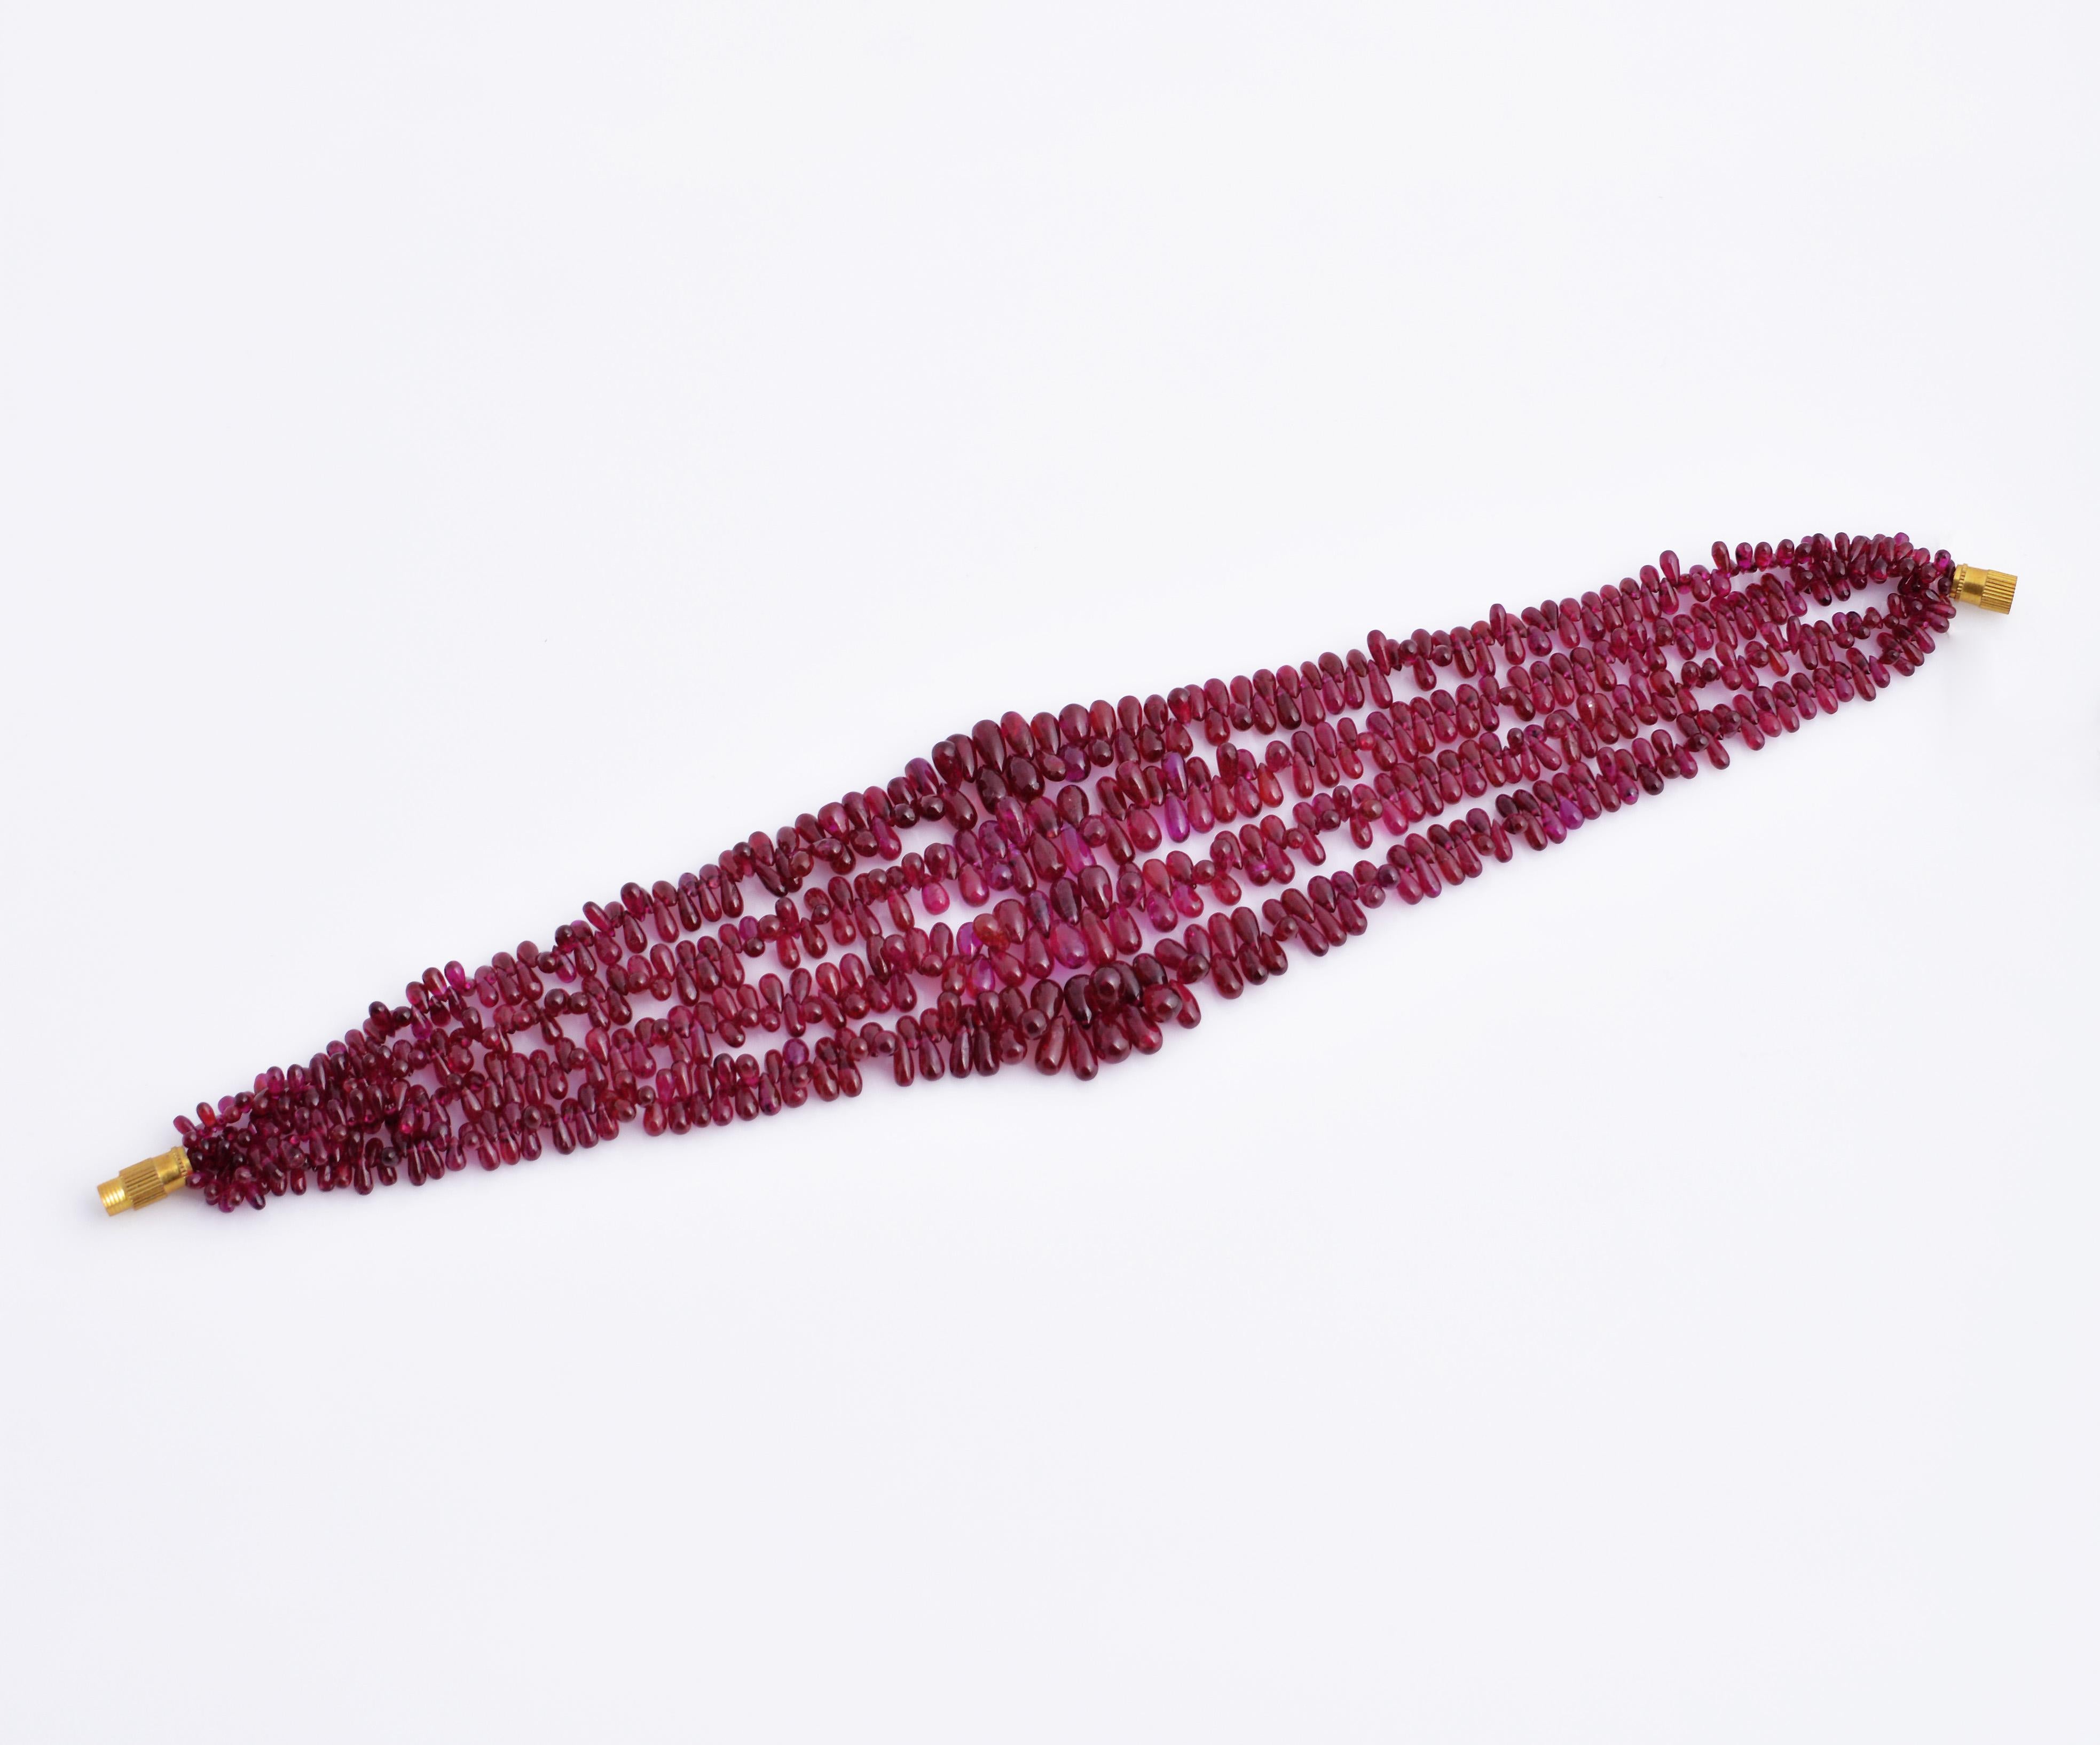 Bead Mozambique Ruby No Heat Drilled Drops for Fine Jewelery